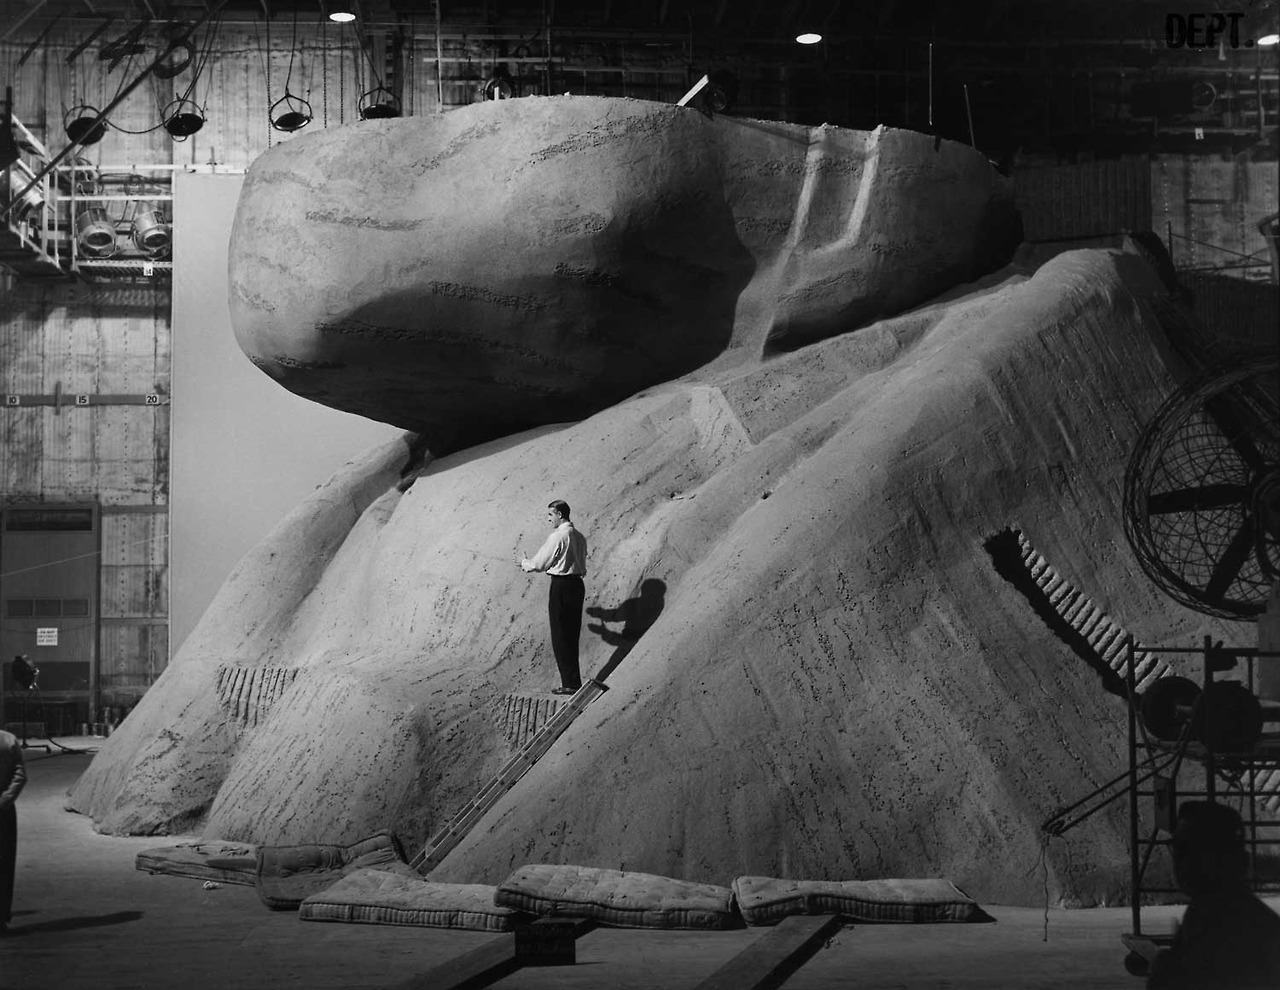 The Mount Rushmore set during in the making of “North by Northwest”, 1959